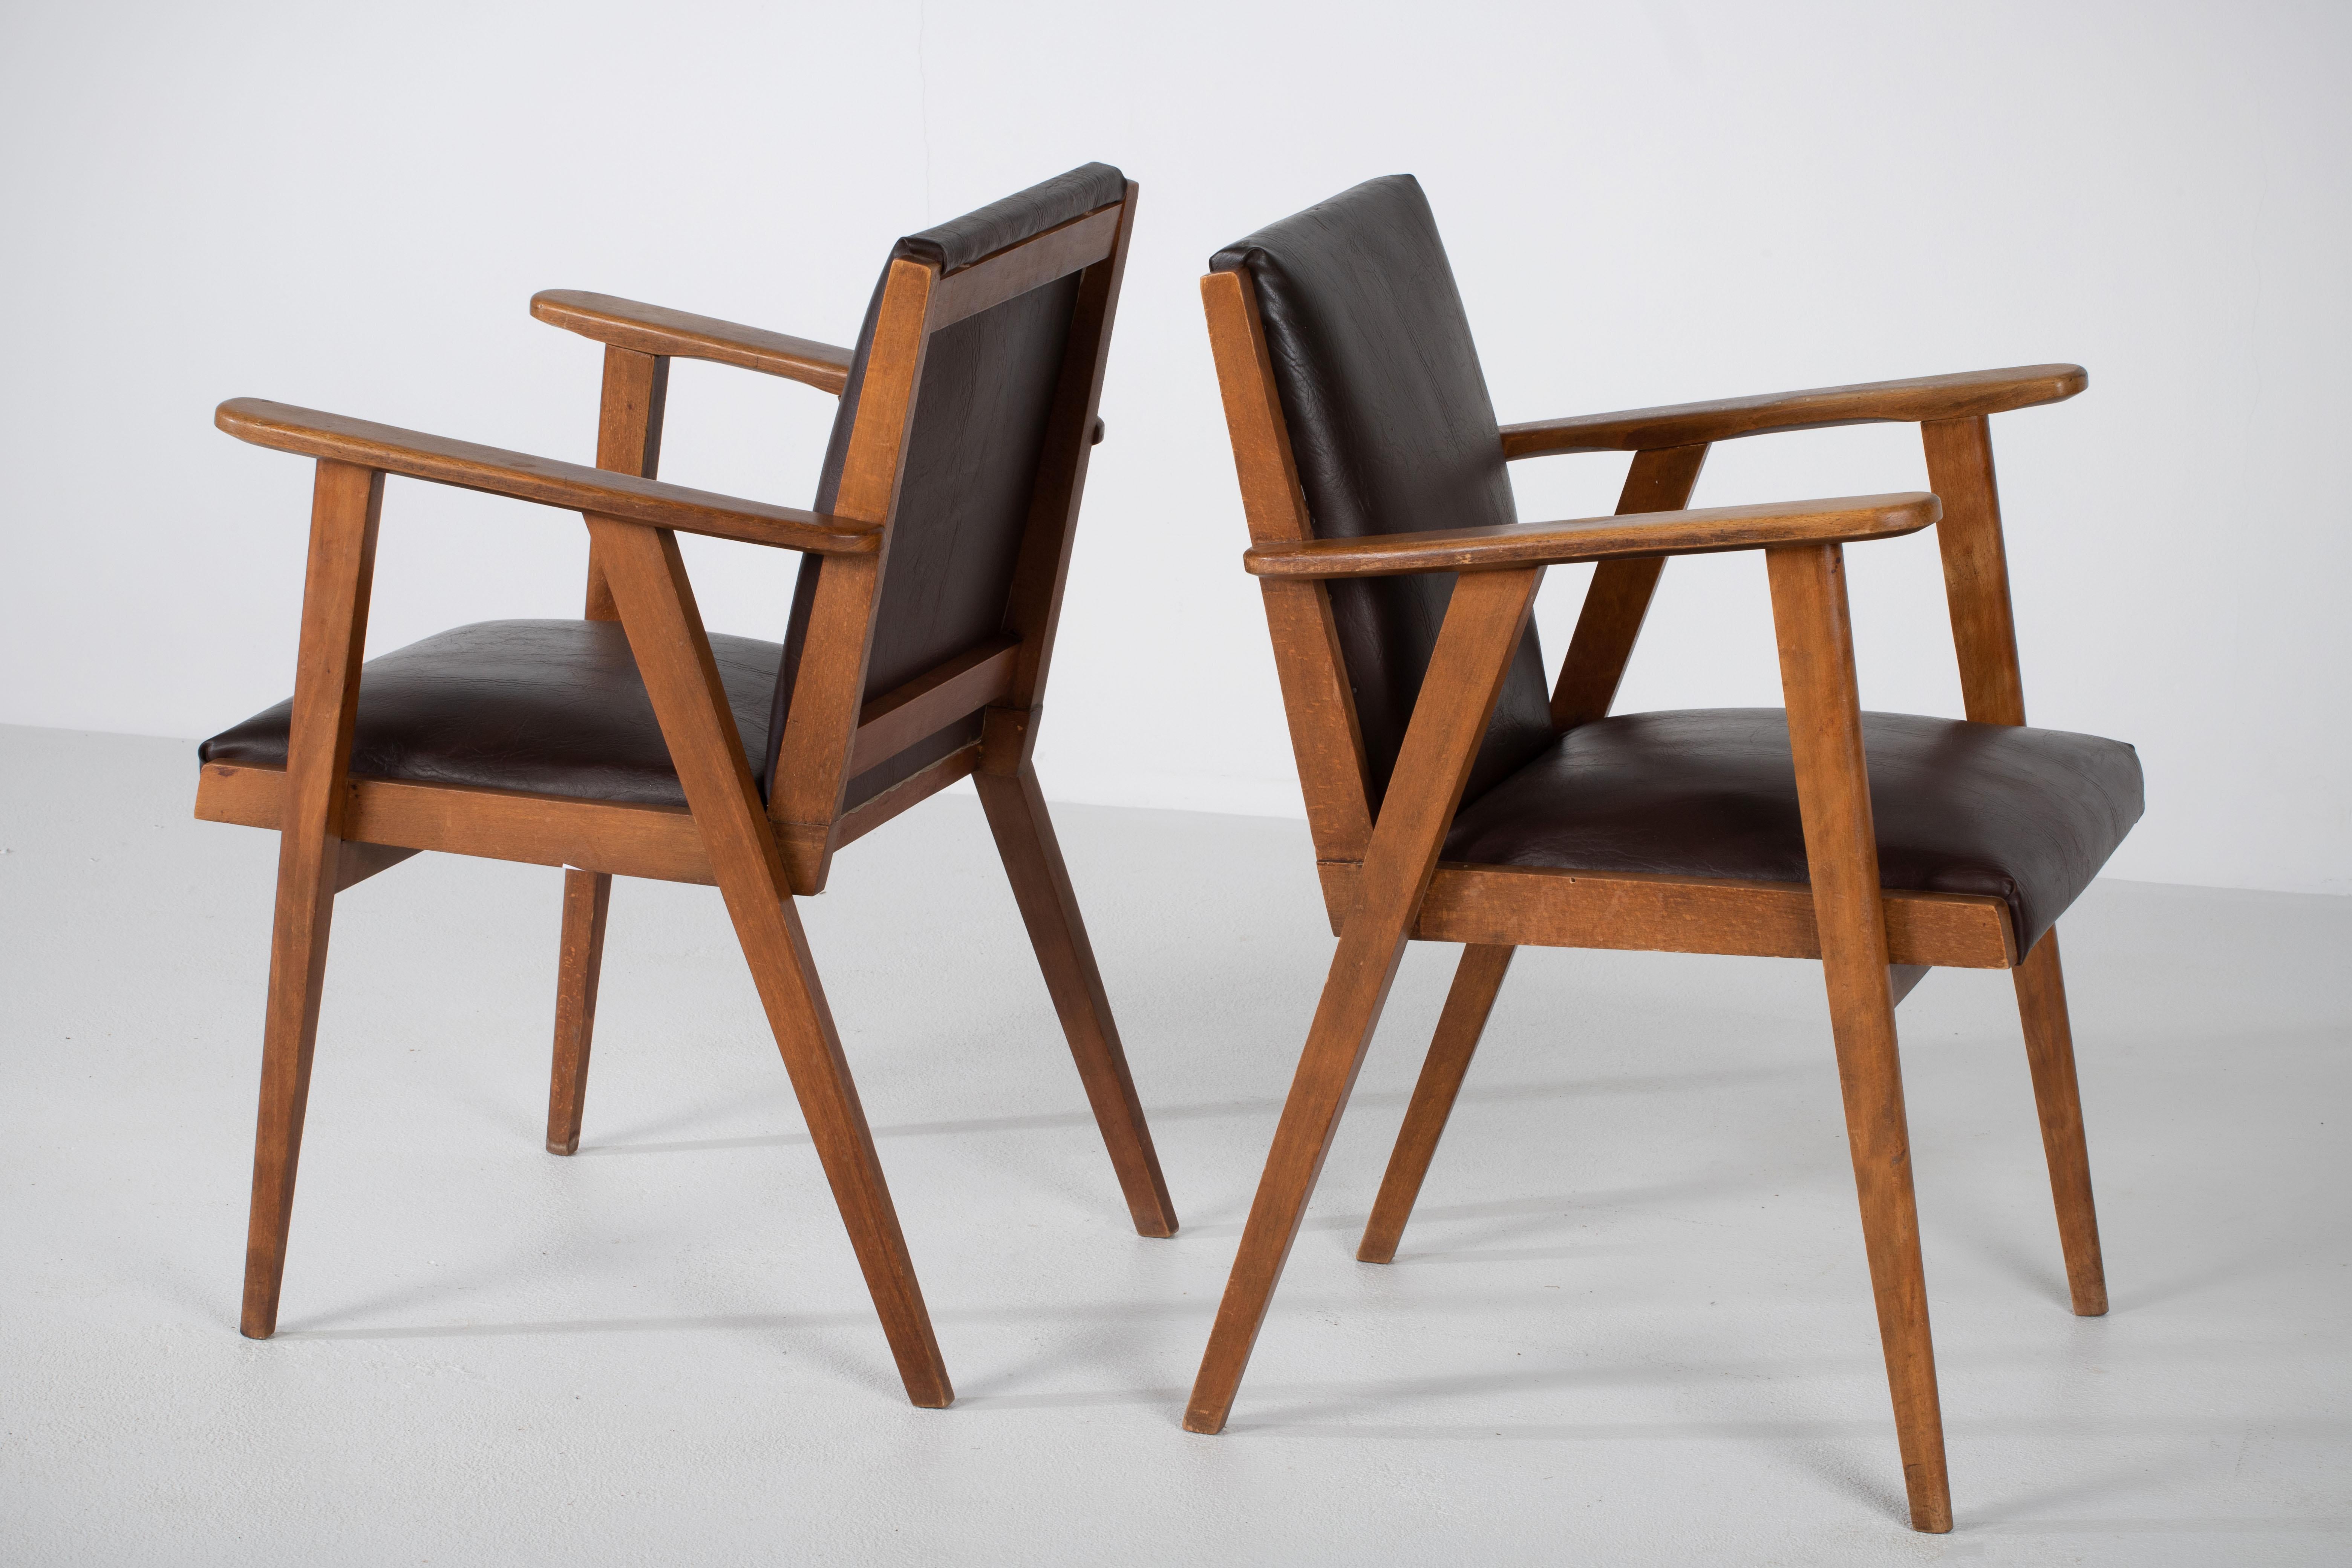 One of a kind Armchair, 1940, post-war modernist design.
Structure in solid oak and seat and backrest in oak.
 